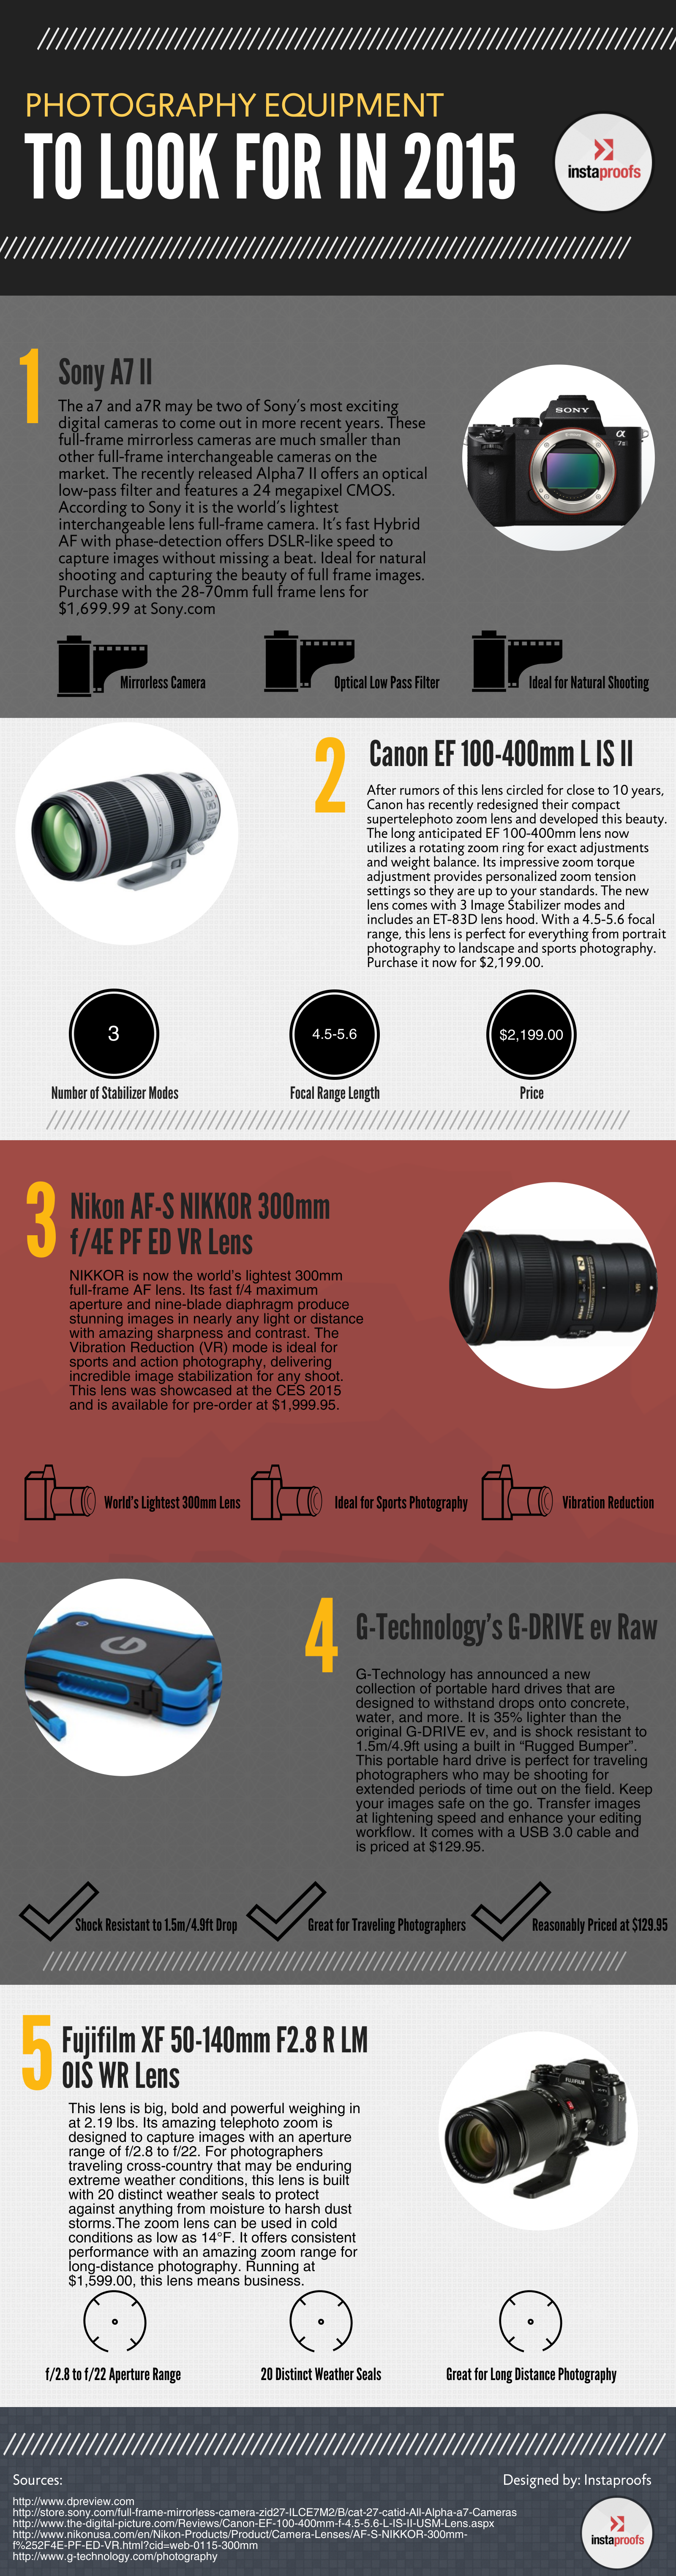 Photography Equipment for 2015